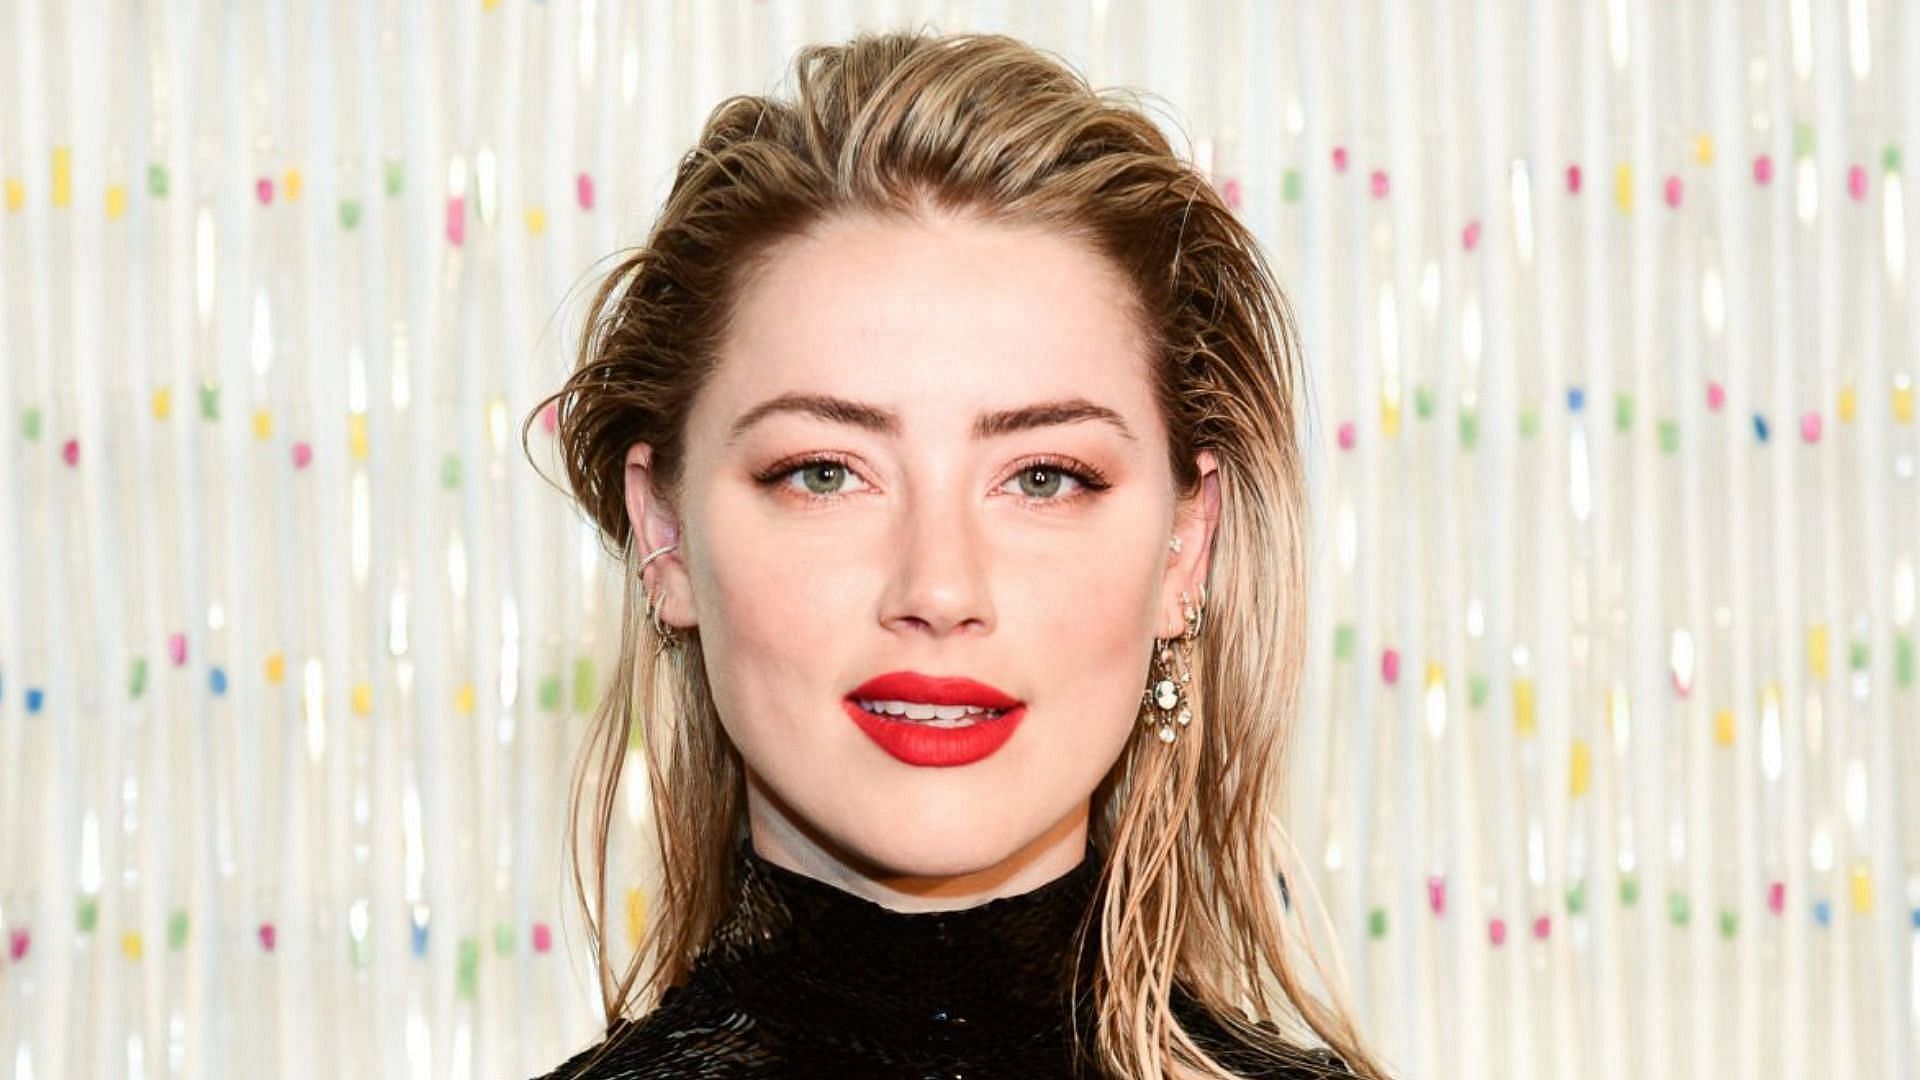 Details about Amber Heard&#039;s questionable parties revealed by House Inhabit (Image via Getty Images)